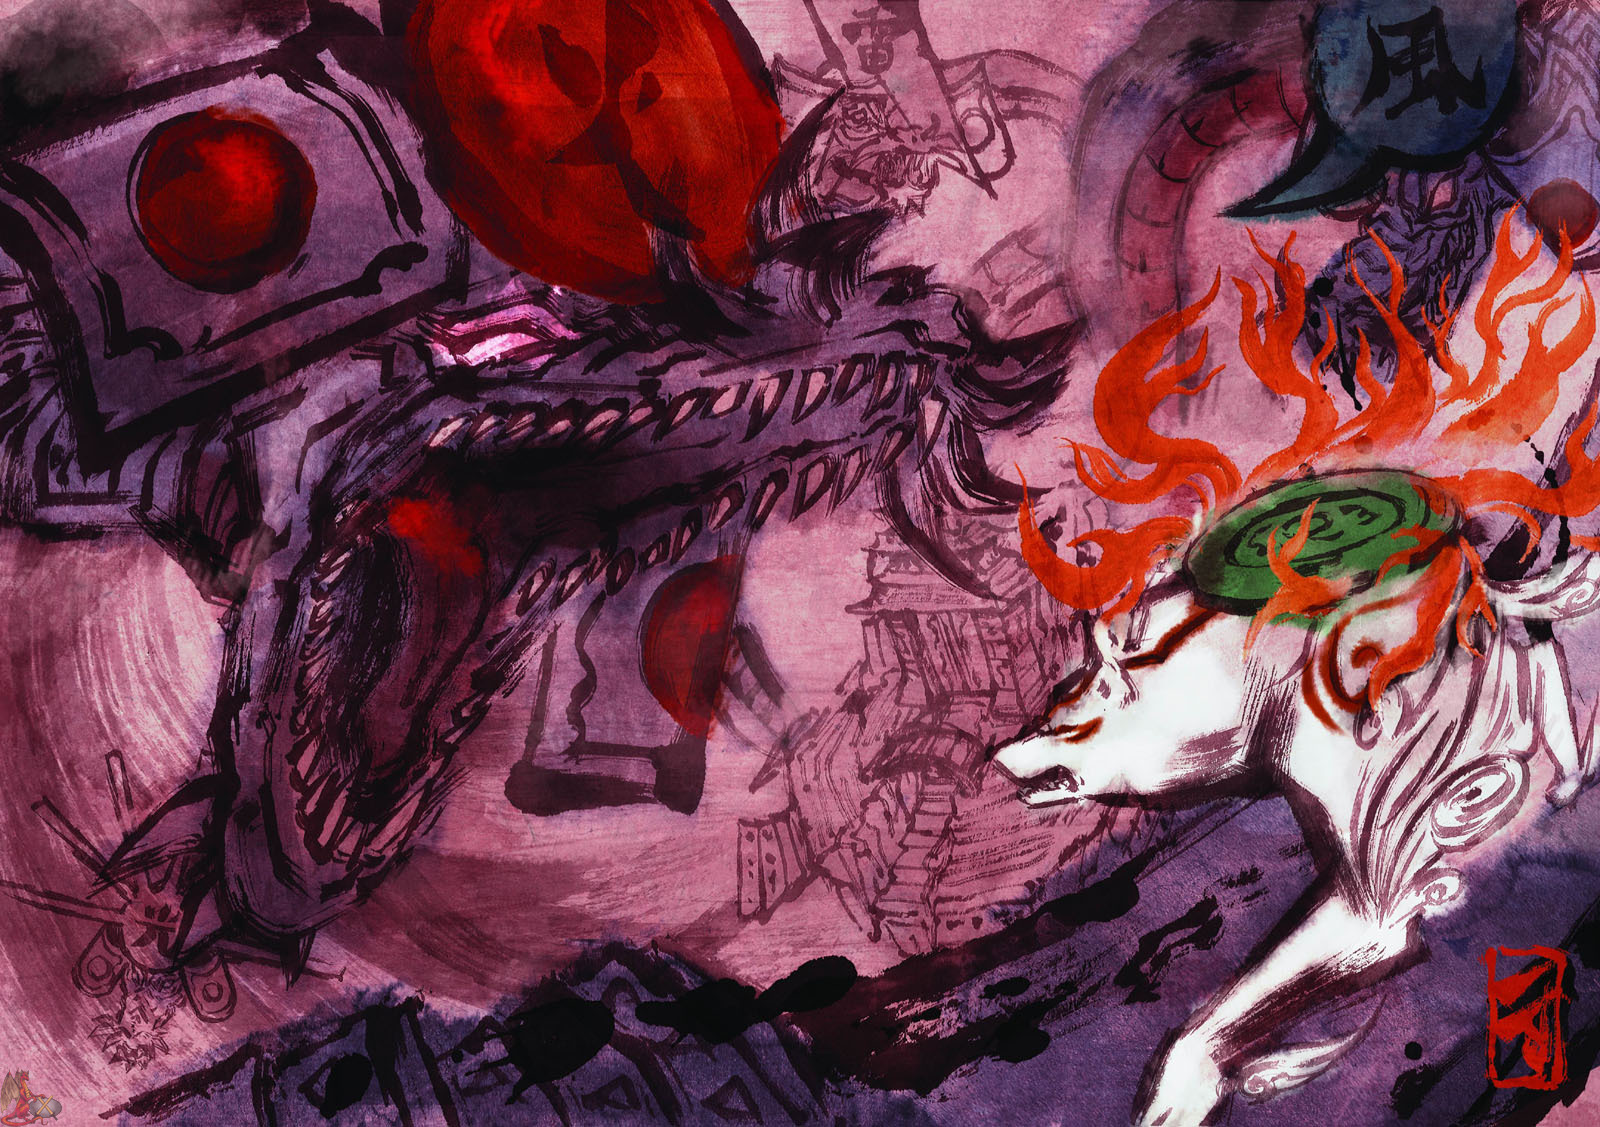 PS2 GAME OF THE WEEK – OKAMI